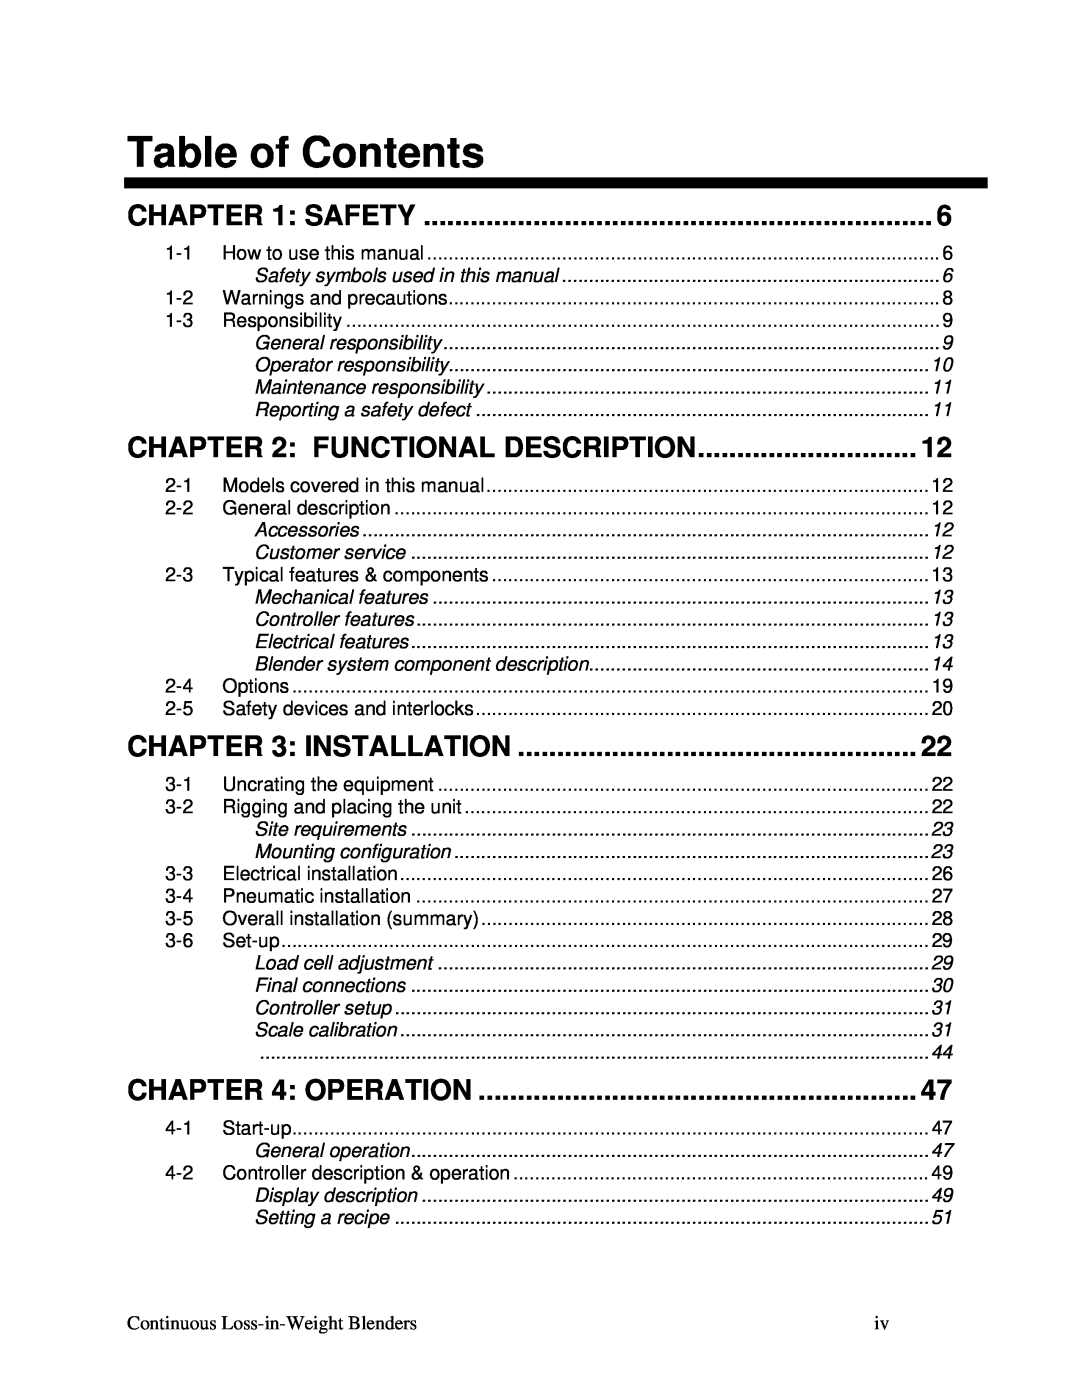 Sterling 060, 100, 600, 015, SLC 5/04 specifications Table of Contents, Functional Description, Installation, Operation, Safety 